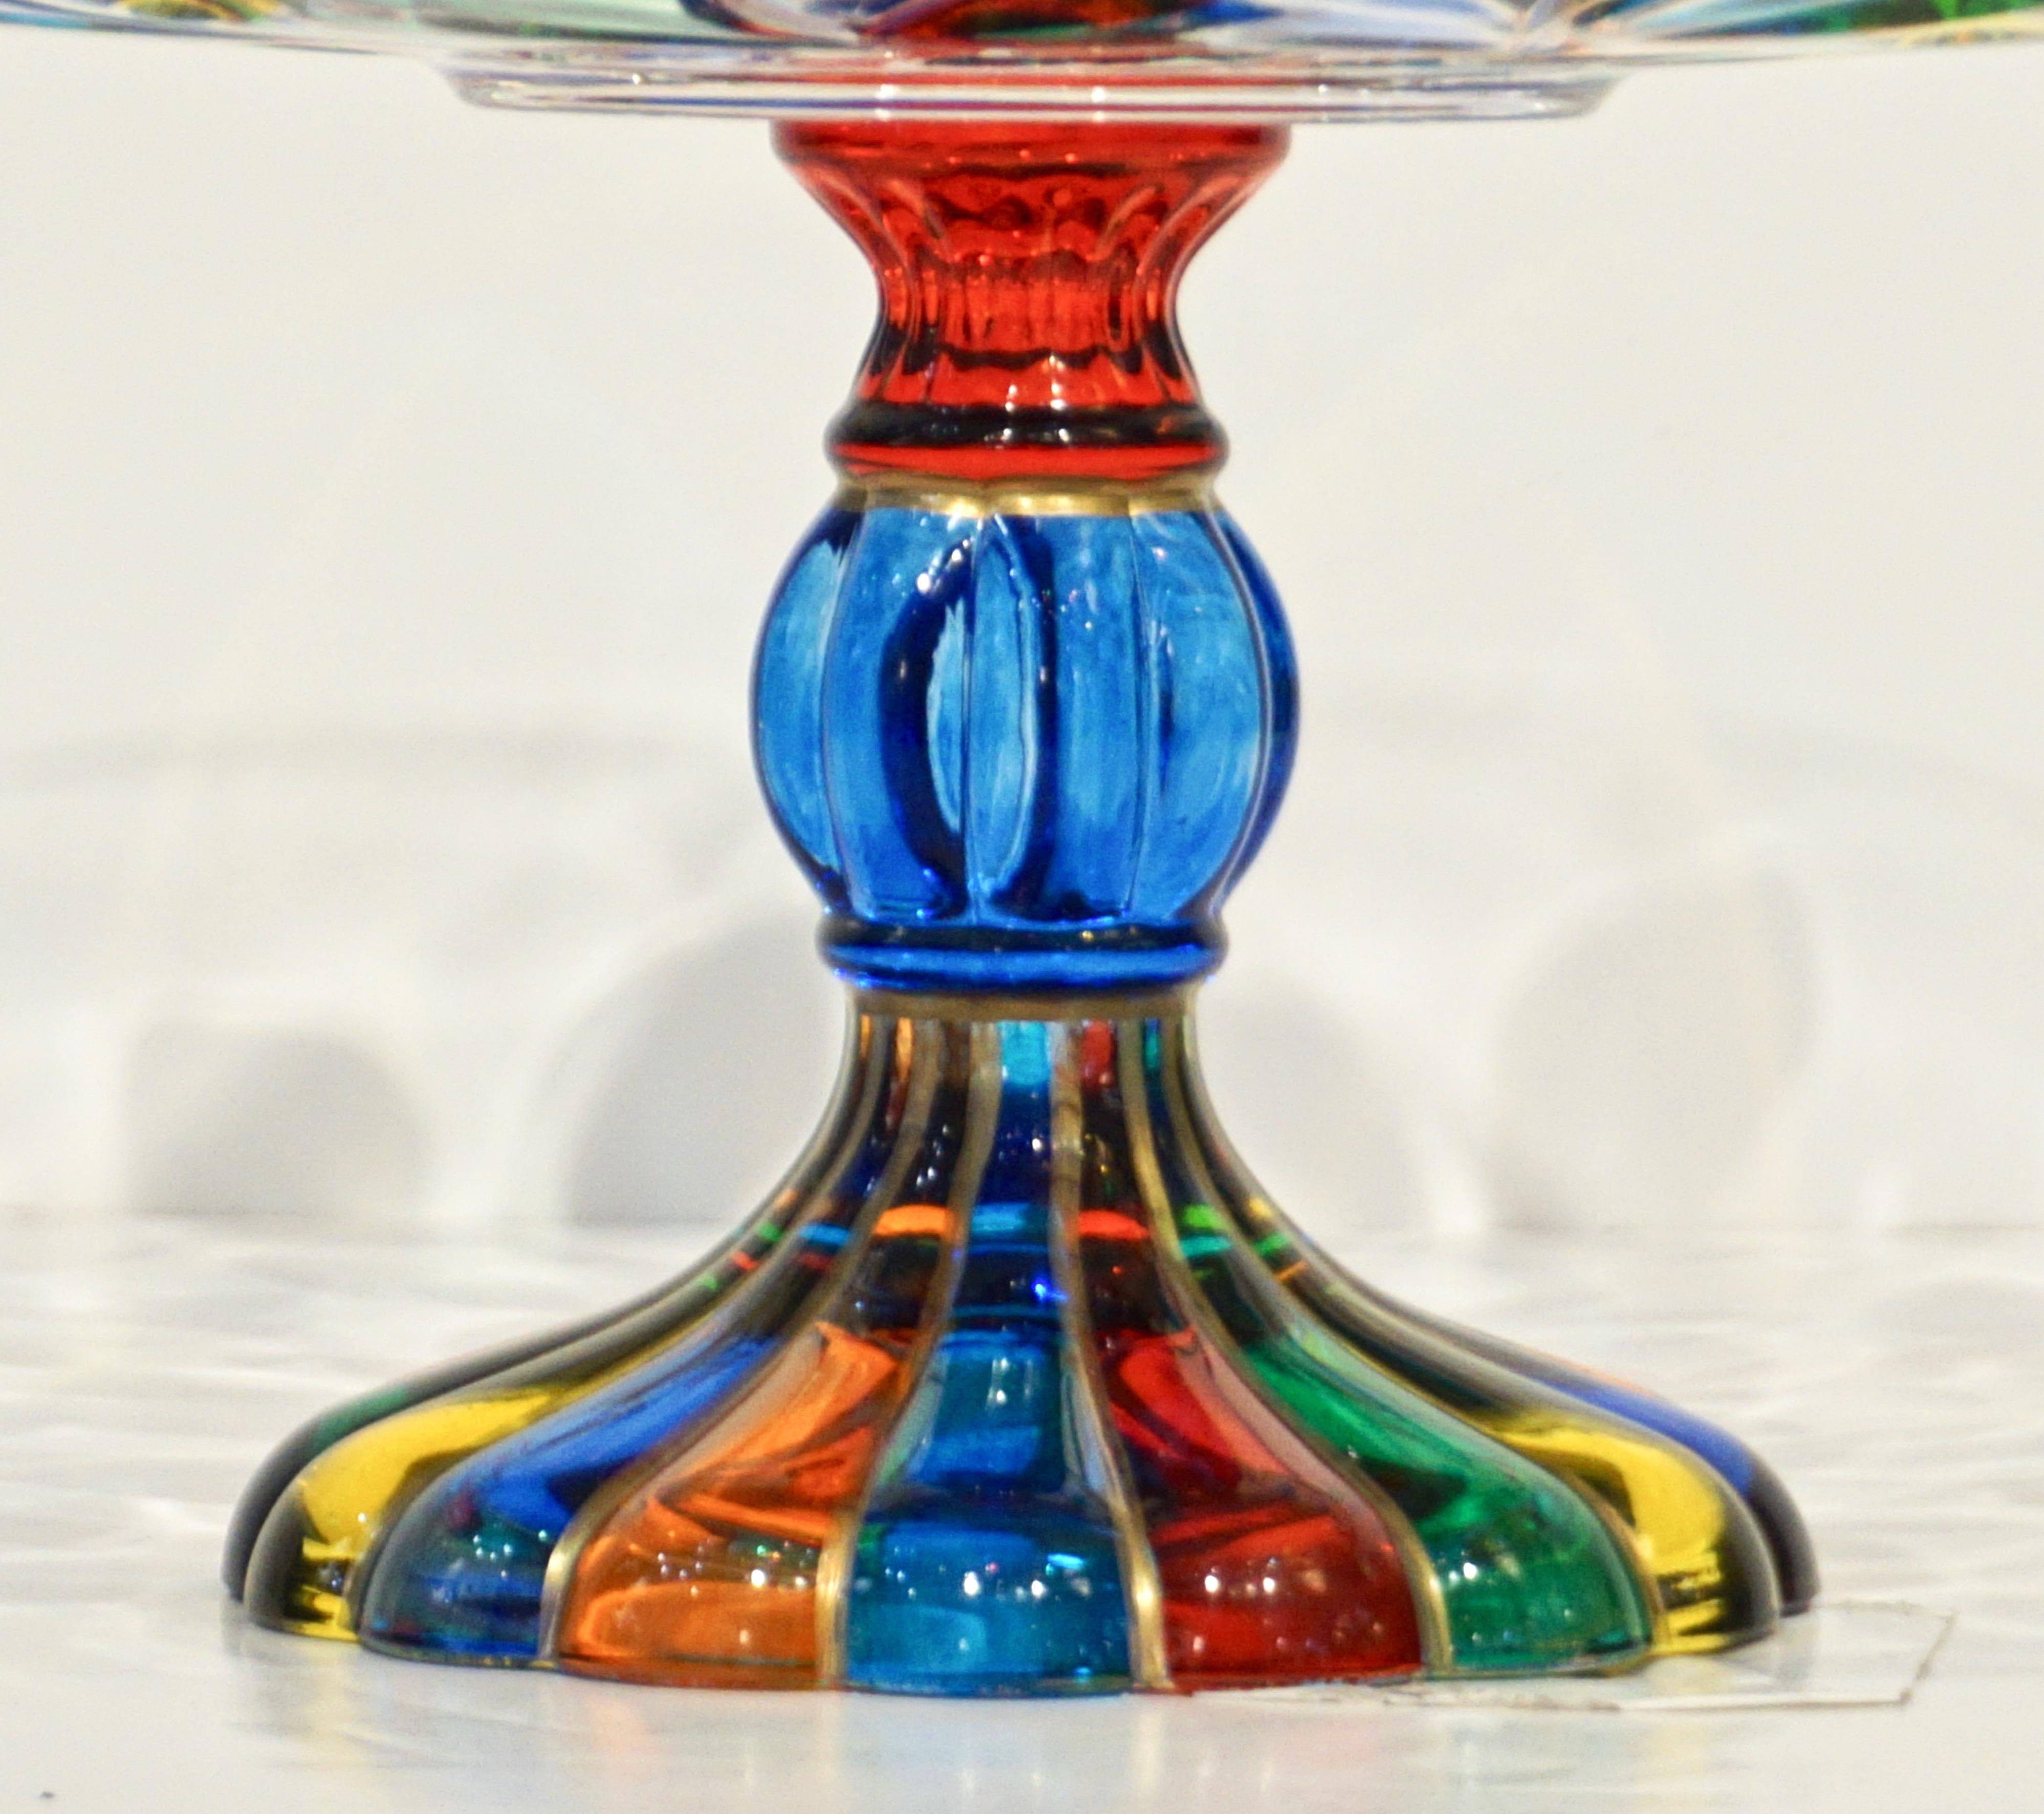 A brightly colored Venetian comport on pedestal, handcrafted in Italy by Vetrerie Colleoni, in crystal clear Murano glass happily overlaid on the exterior with an engraved pattern of leaves in green, yellow, turquoise, orange, red and blue colors.